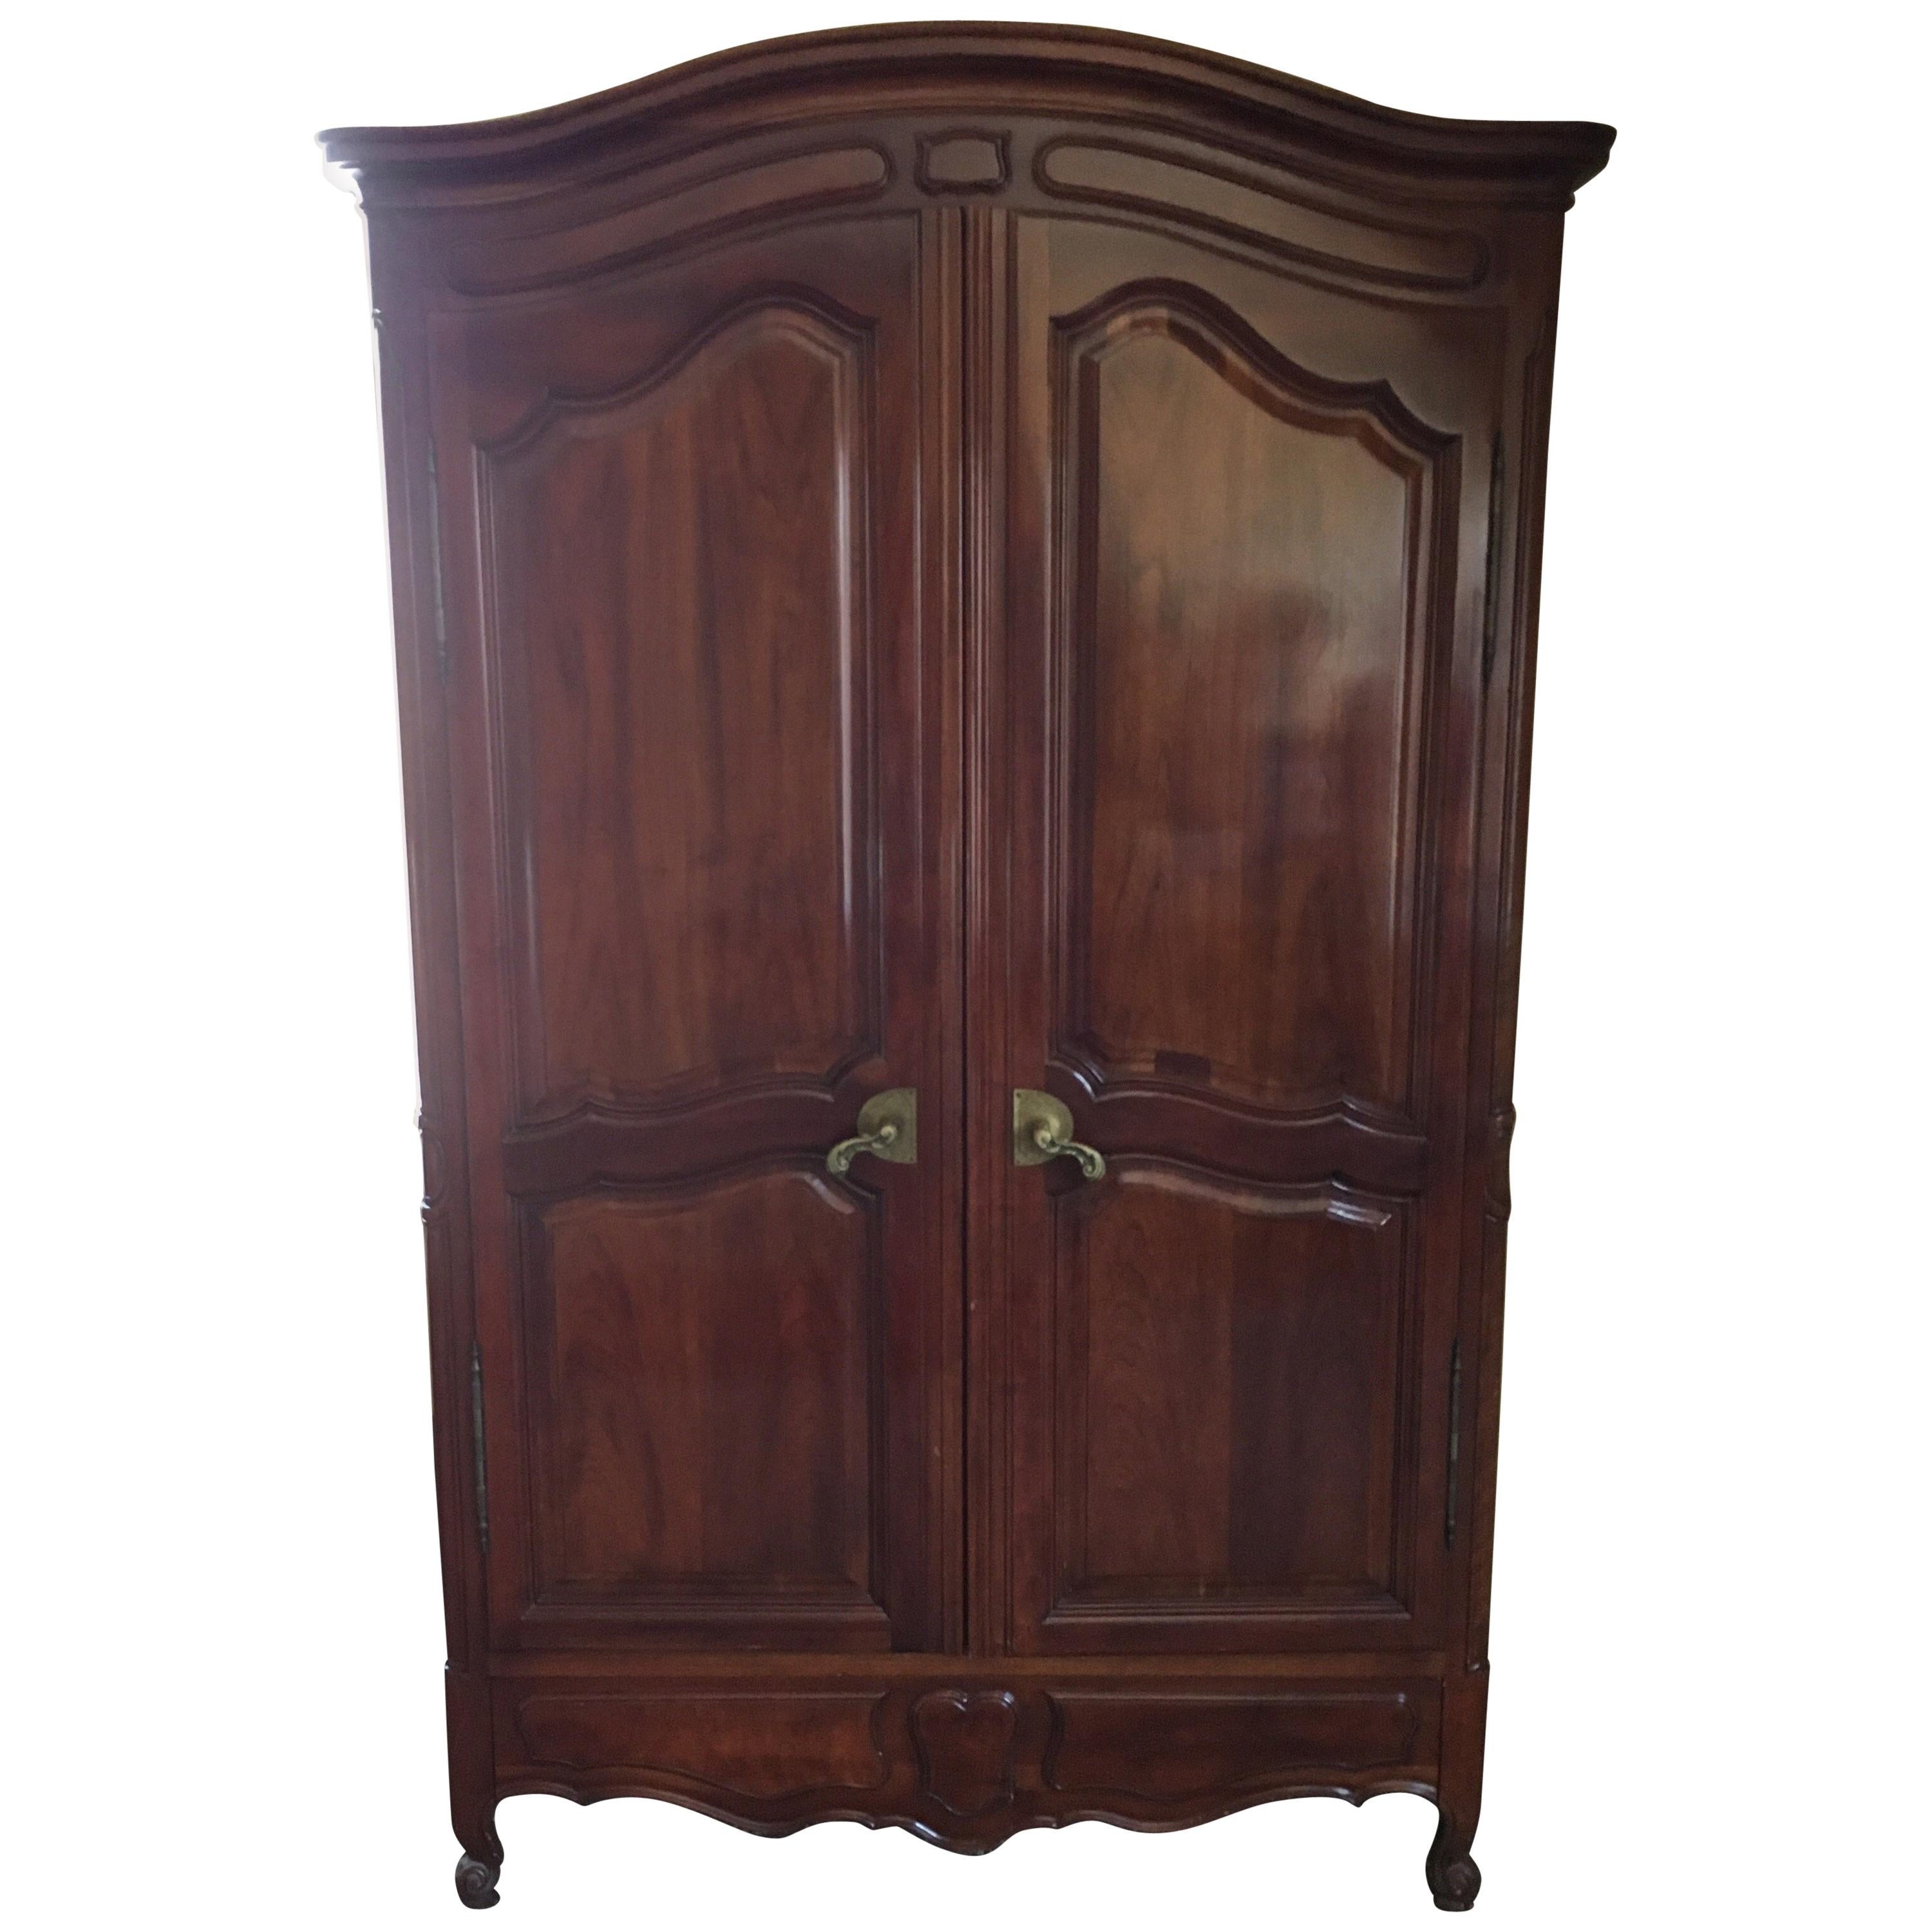 20th Century French Provincial Style Walnut Armoire by John Widdicomb For Sale